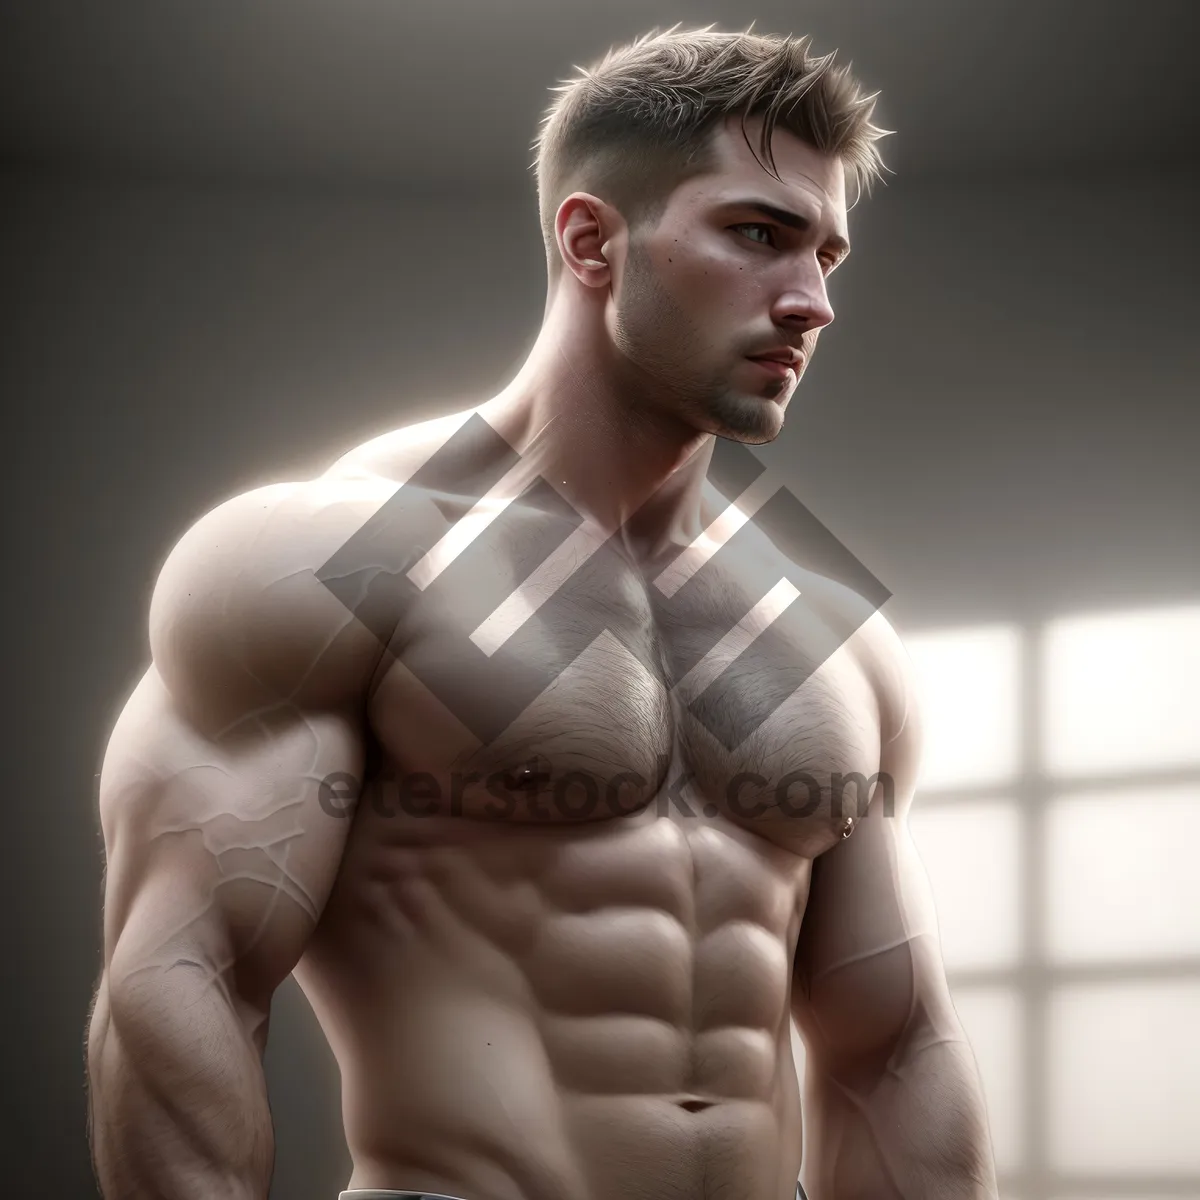 Picture of Sculpted Abs and Arm Strength of Athletic Male